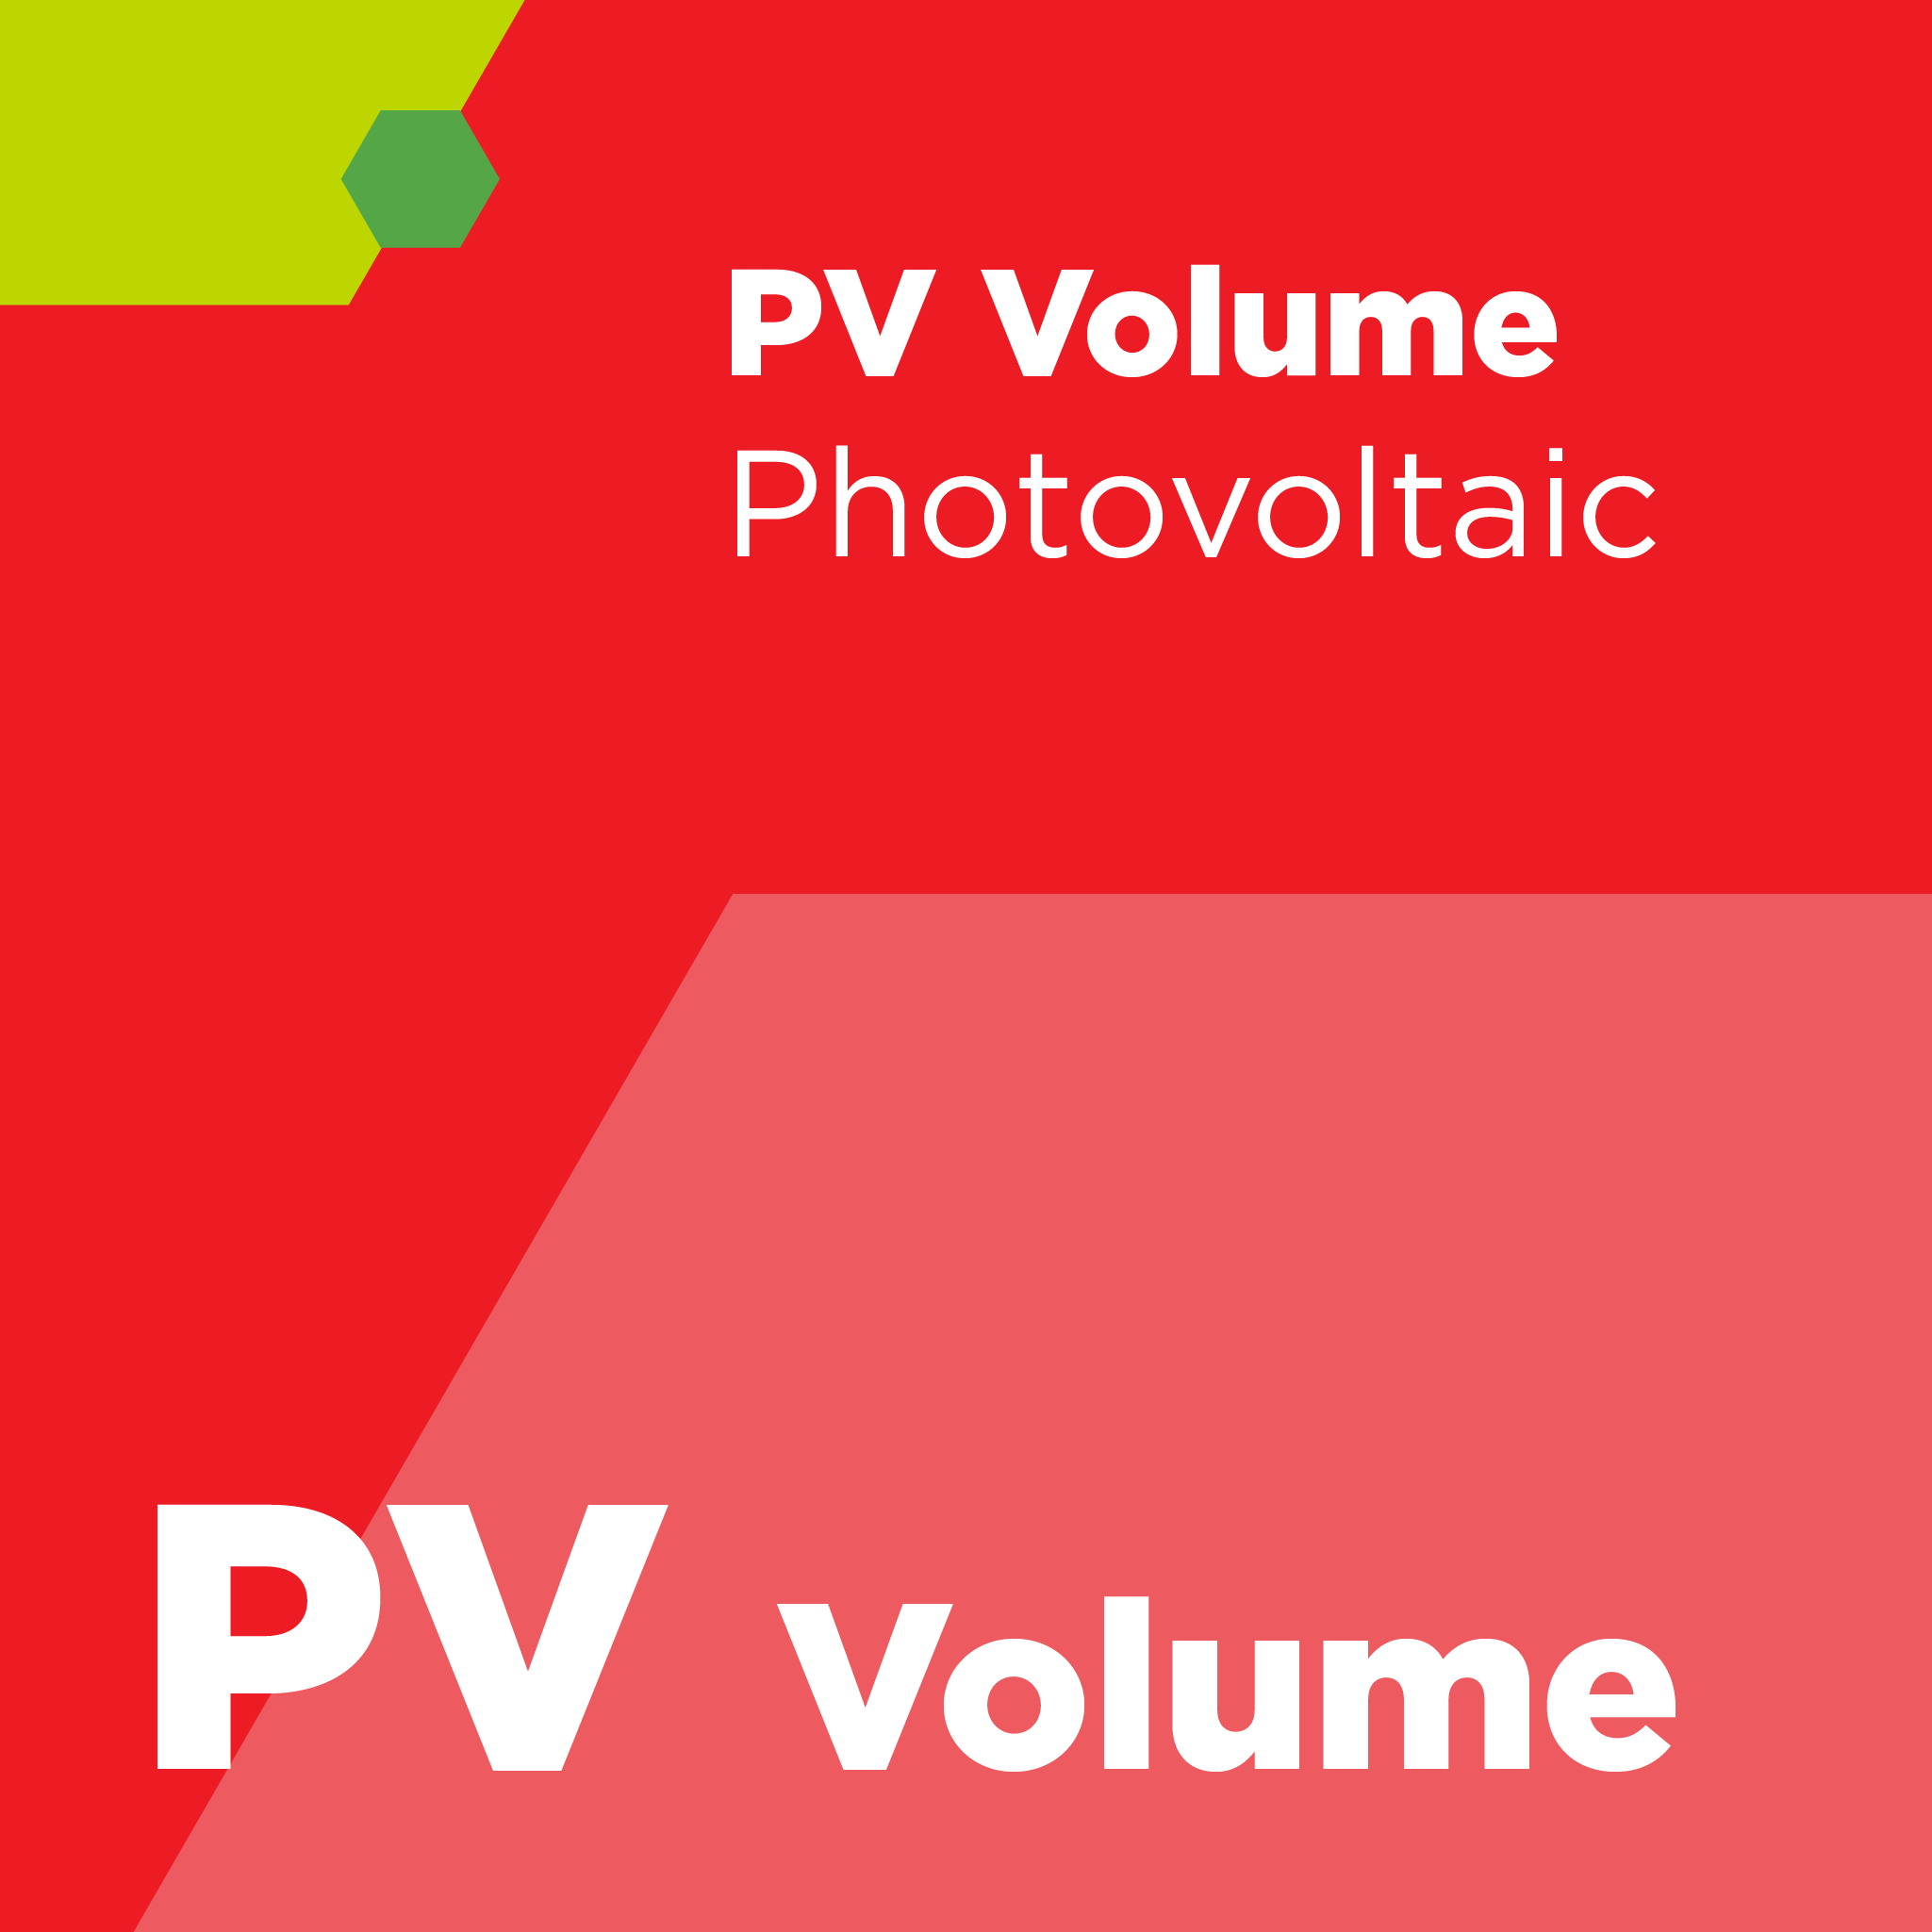 PV02100 - SEMI PV21 - Guide for Silane (SiH4), Used in Photovoltaic Applications